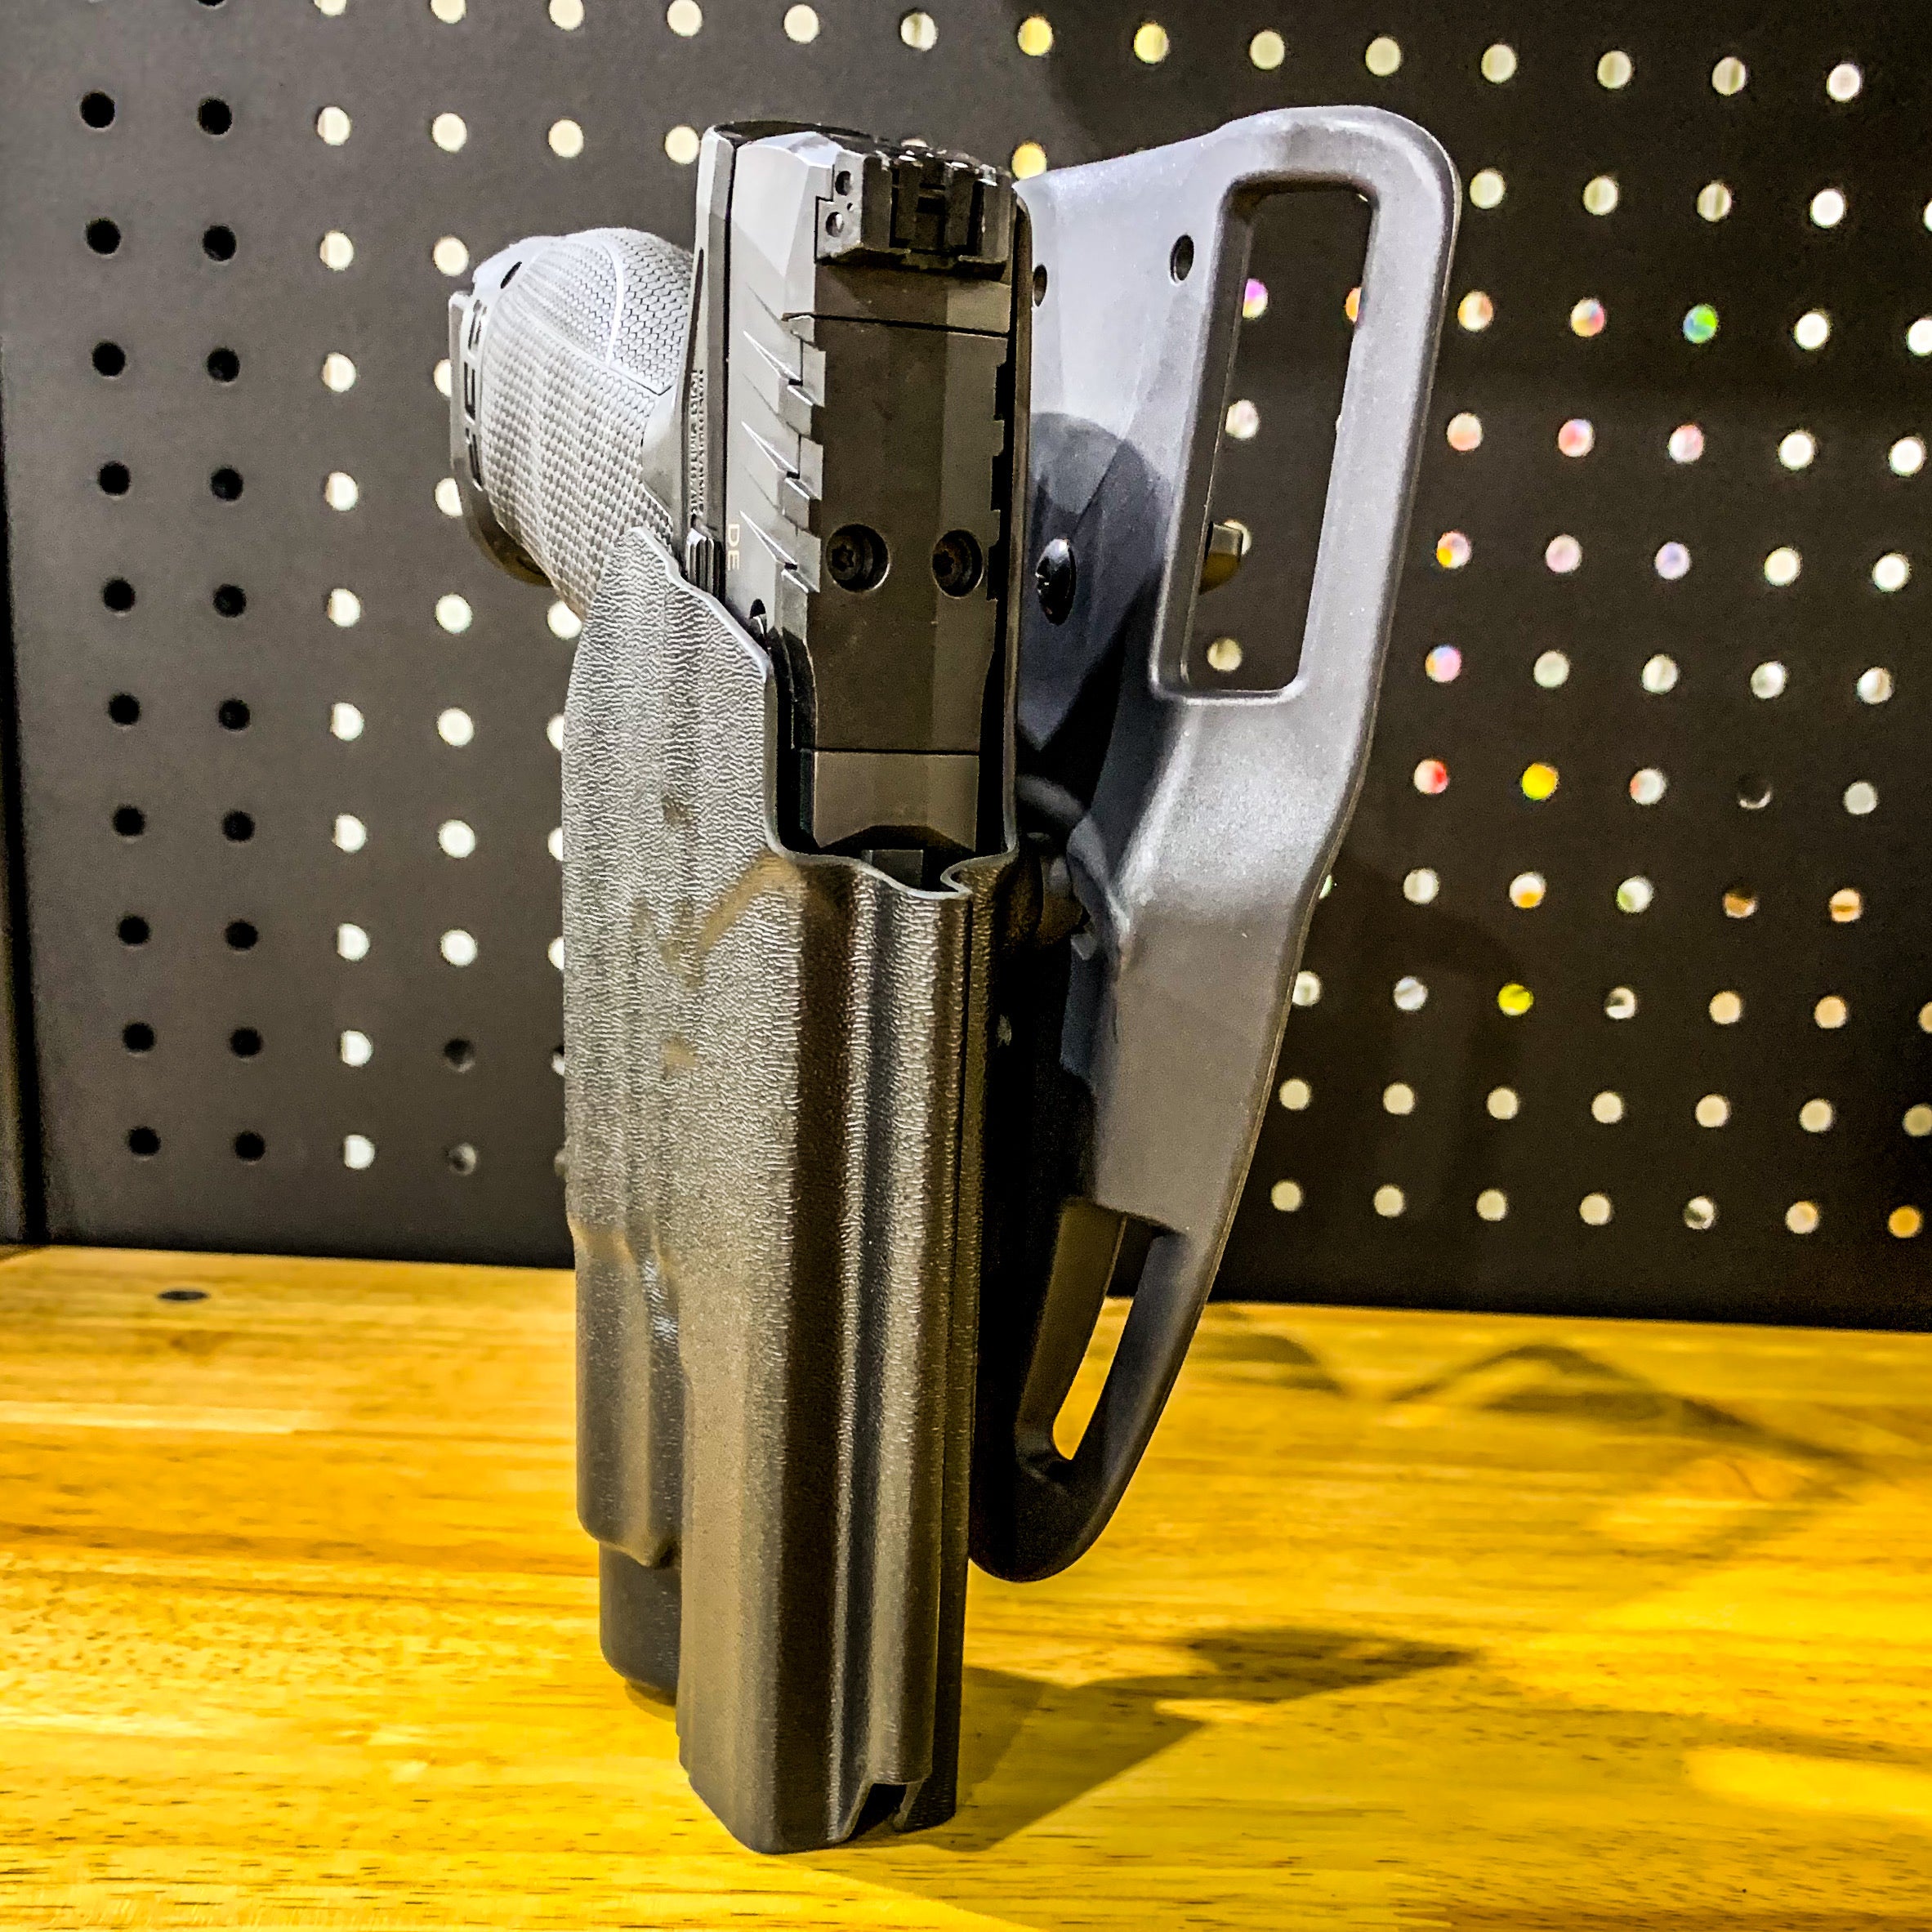 For the best Outside Waistband Duty & Competition Kydex Holster designed to fit the Walther PDP  5" Full-Size or PDP Pro SD 5.1" pistol with the Streamlight TLR-1HL or TLR-1, shop Four Brothers Holsters. Cut for red dot sights, full sweat guard, adjustable retention & open muzzle for threaded barrels & compensators. 